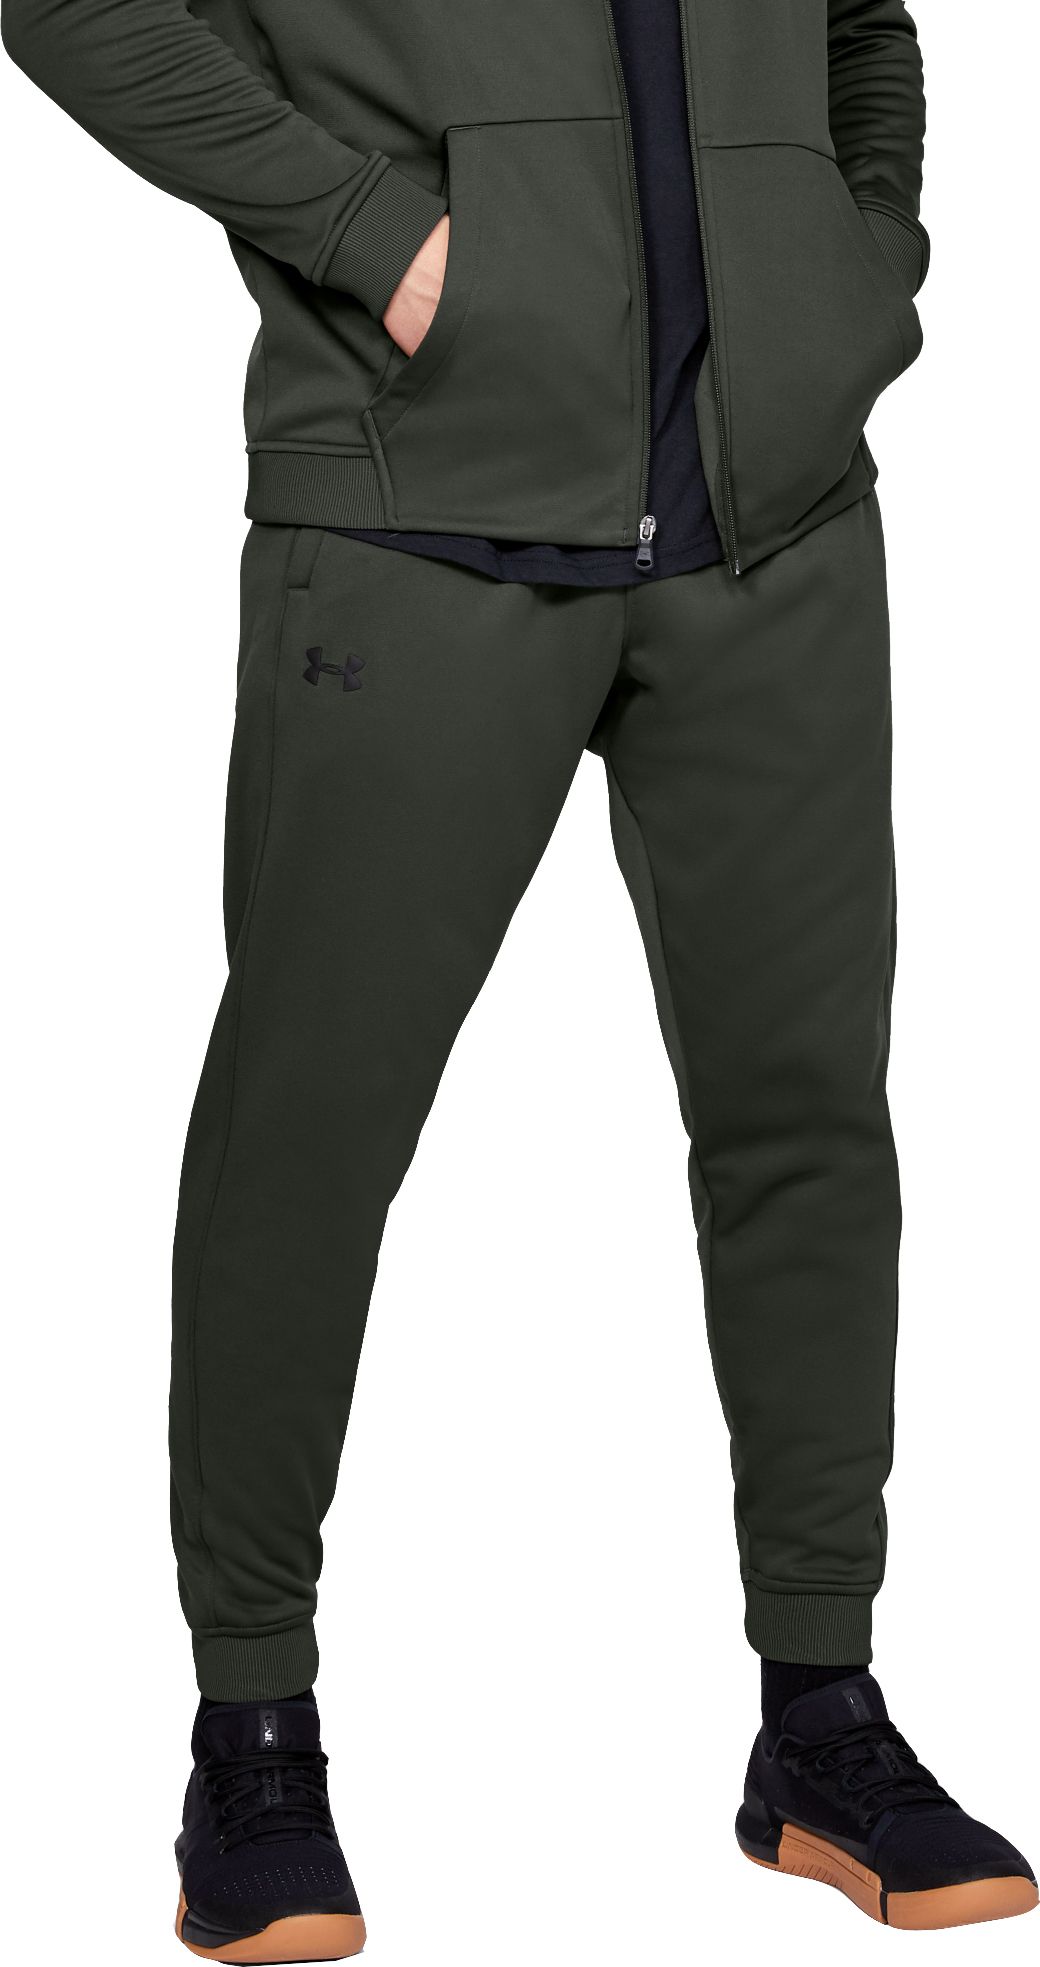 under armour pants with zipper pockets